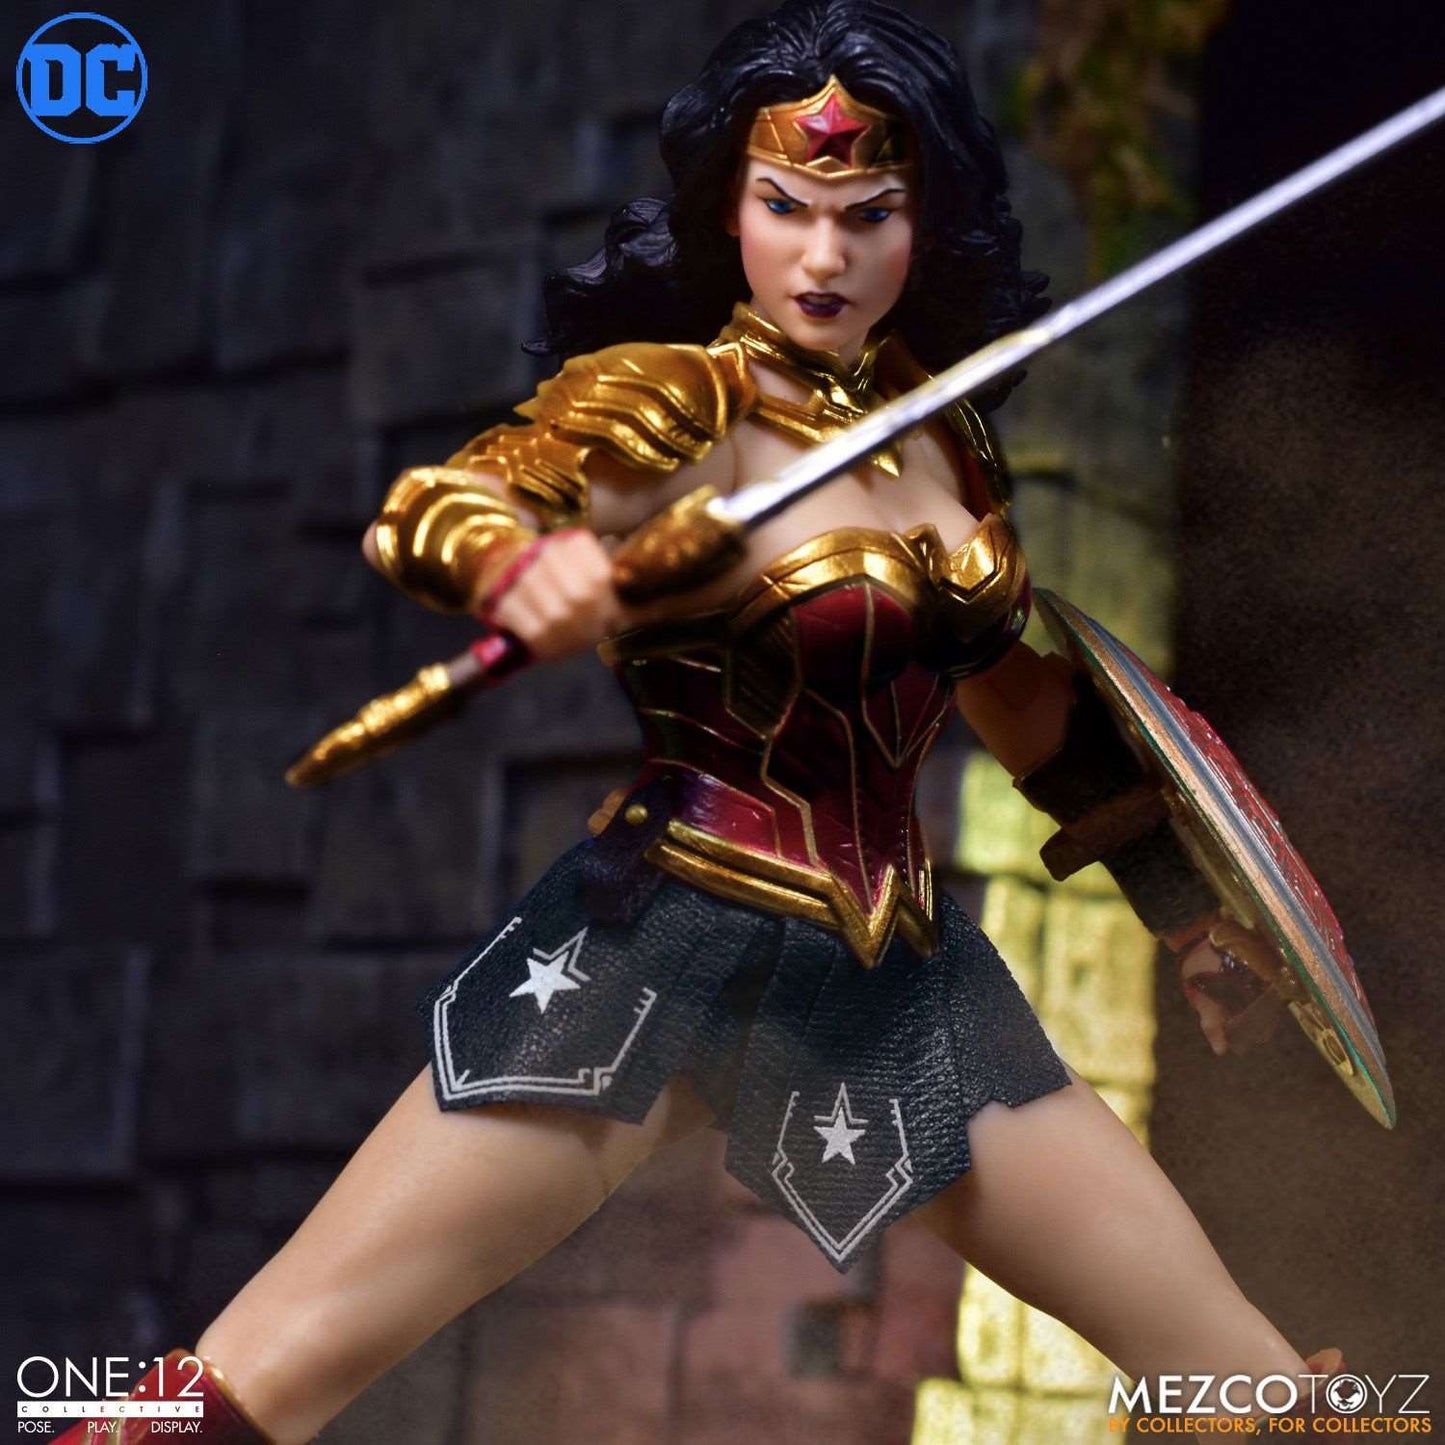 Mezco One:12 DC Universe Wonder Woman figure with sword and shield